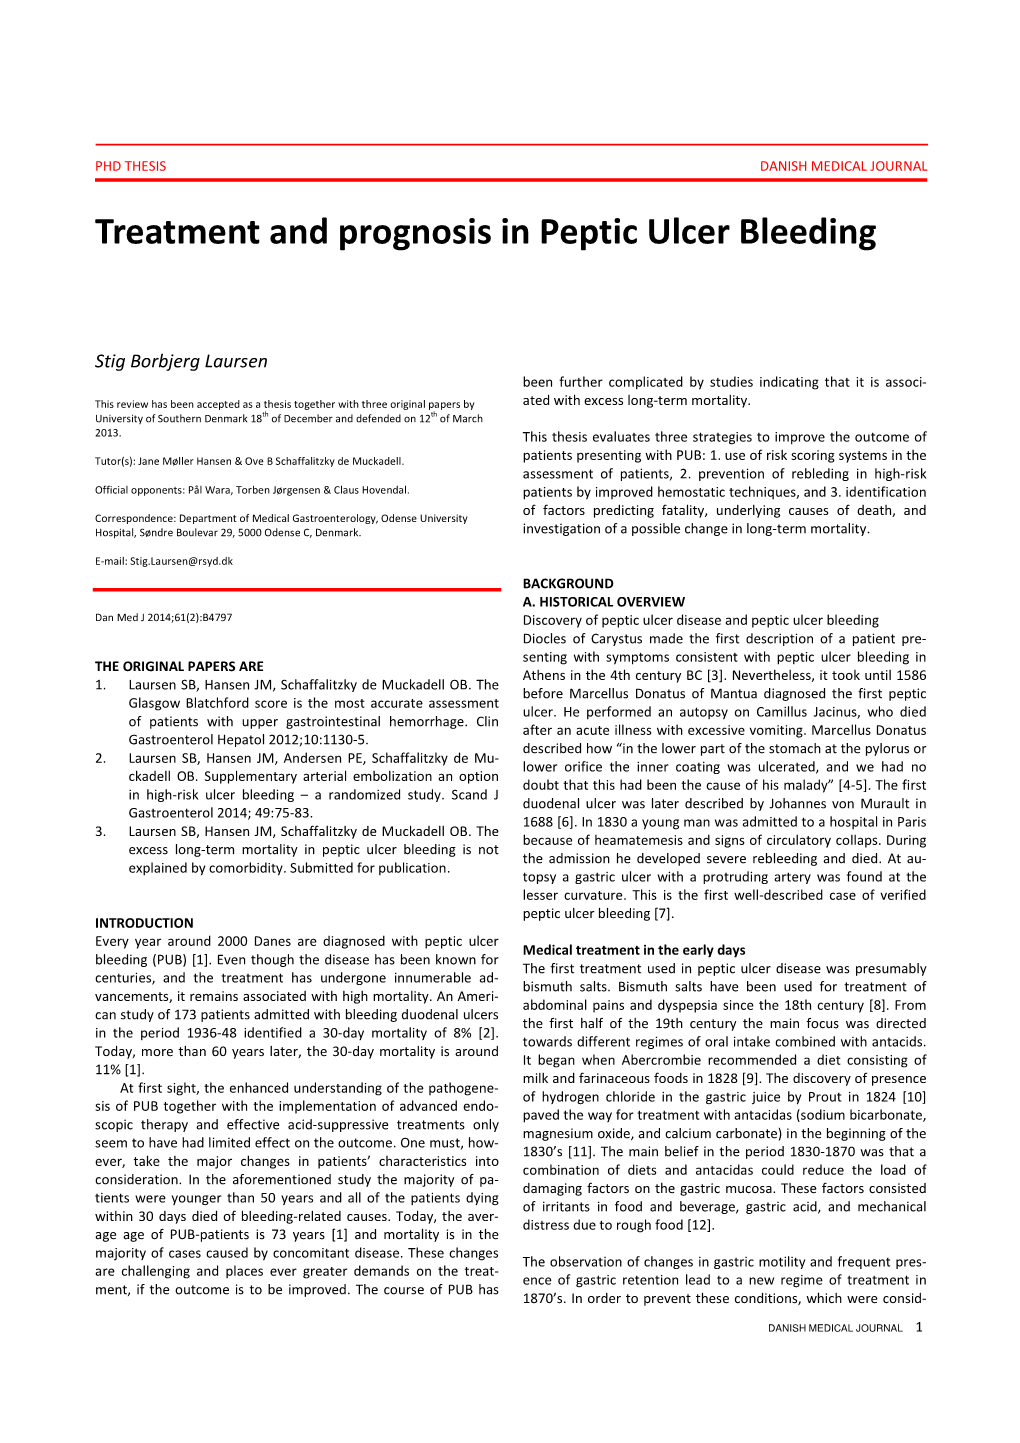 Treatment and Prognosis in Peptic Ulcer Bleeding